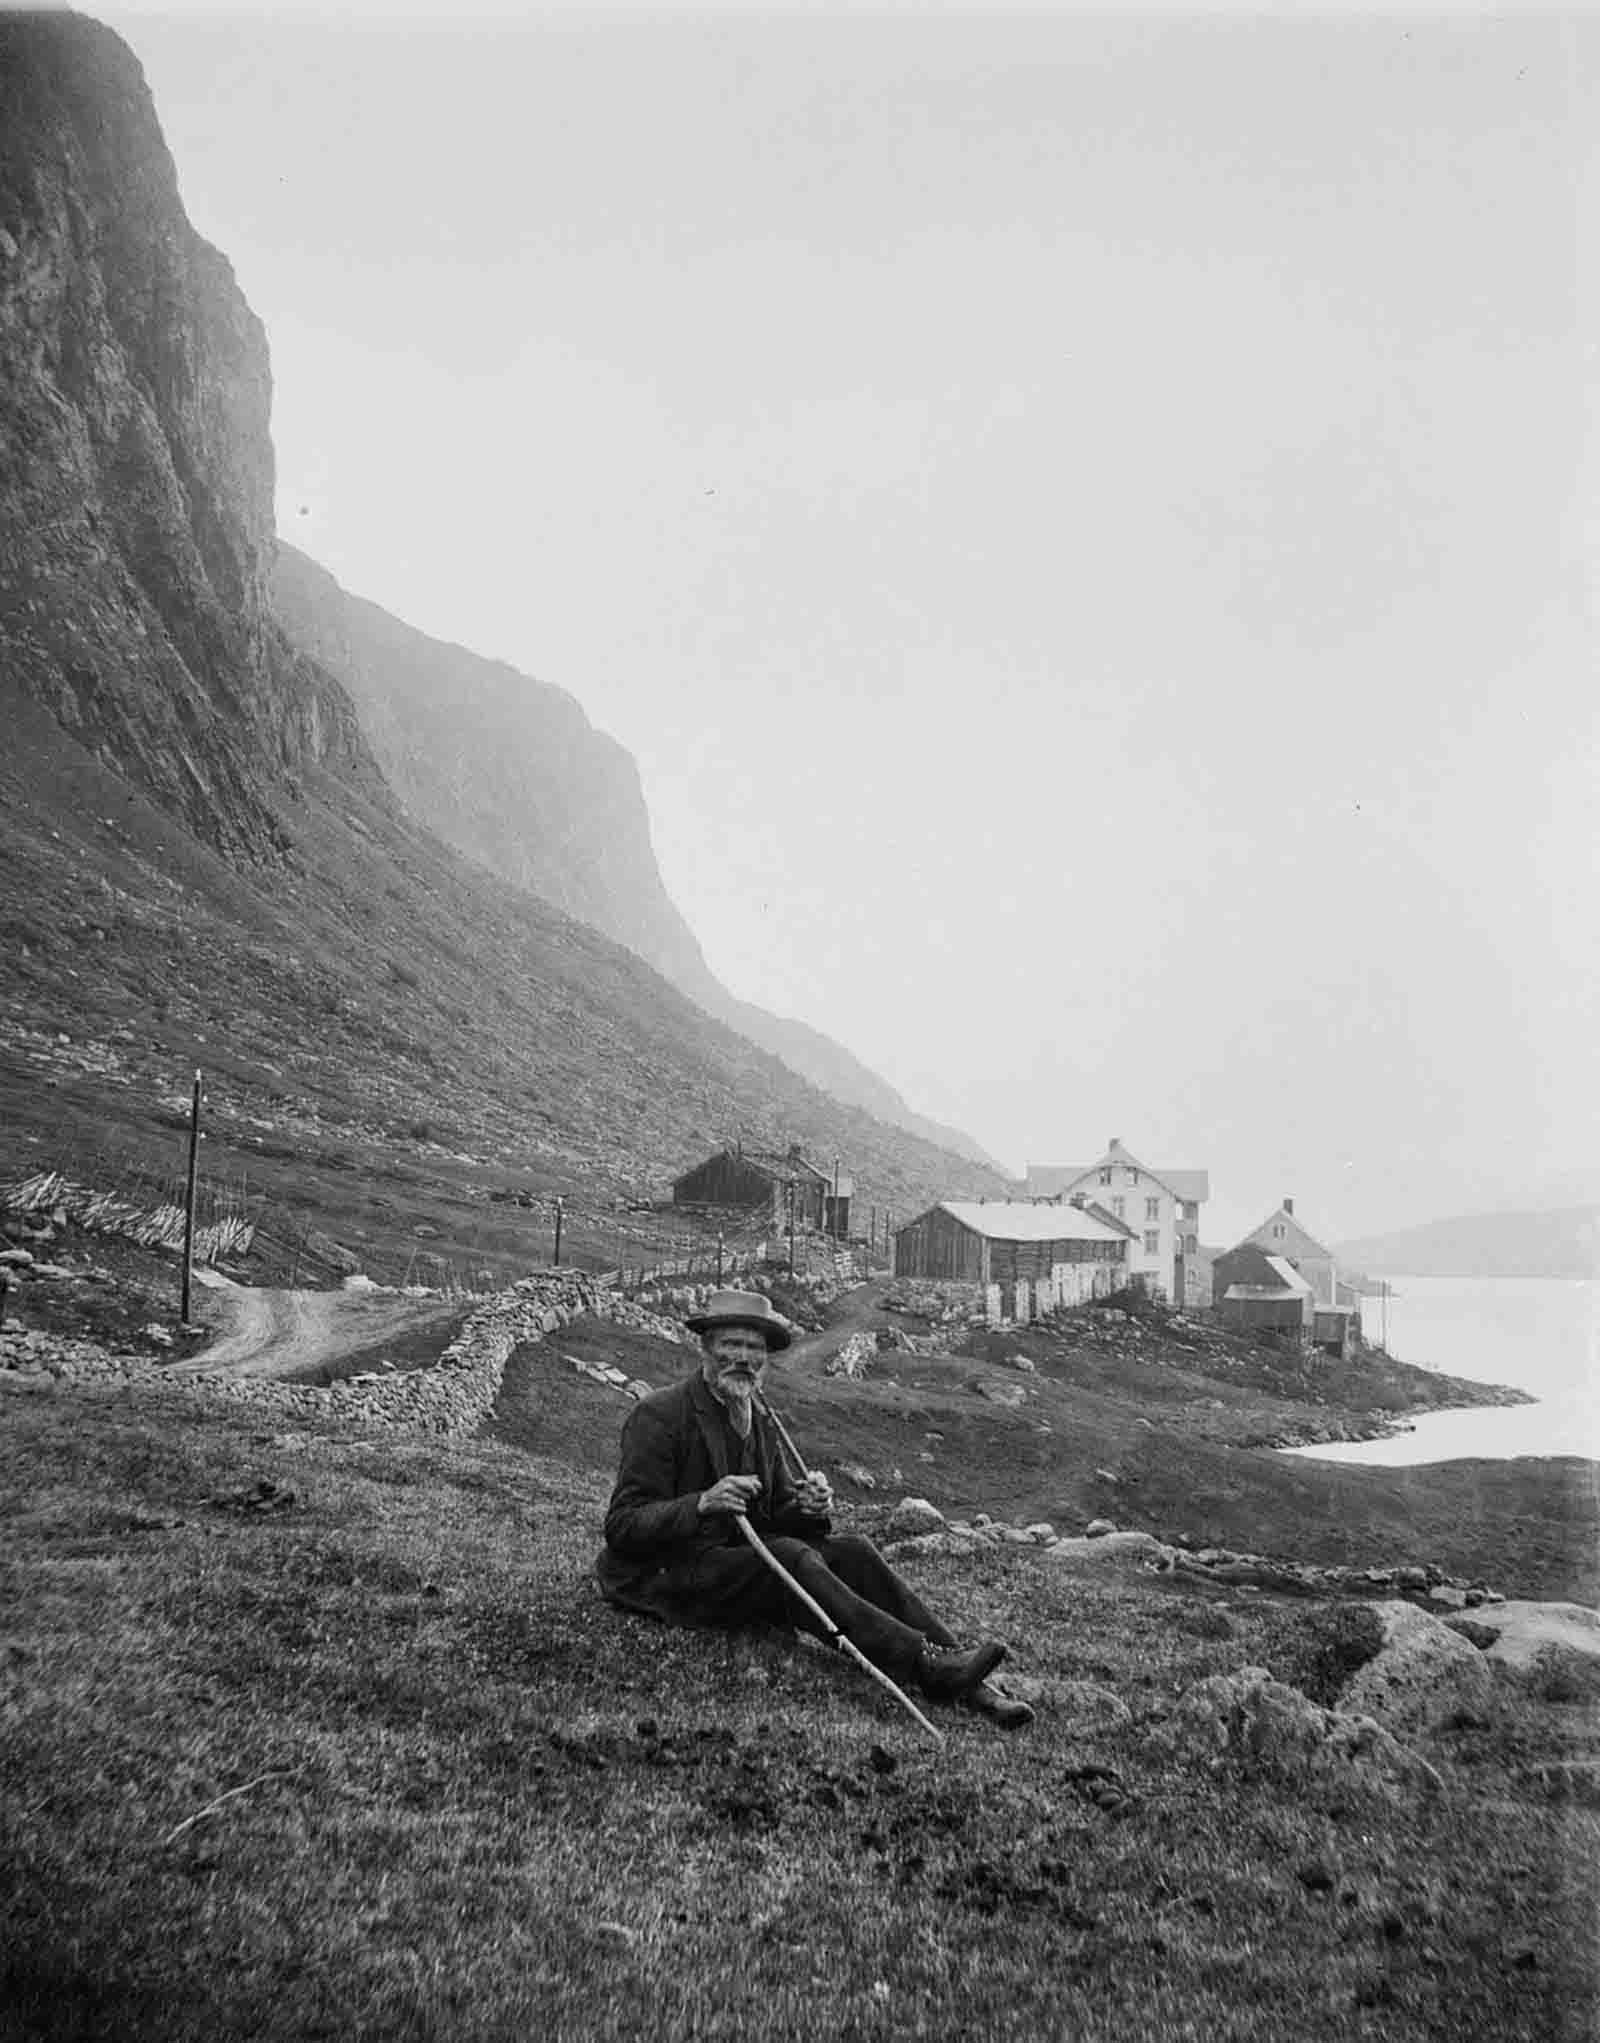 The Rural Life of Norway in the 1900s Through Stunning Photos of Nils Olsson Reppen